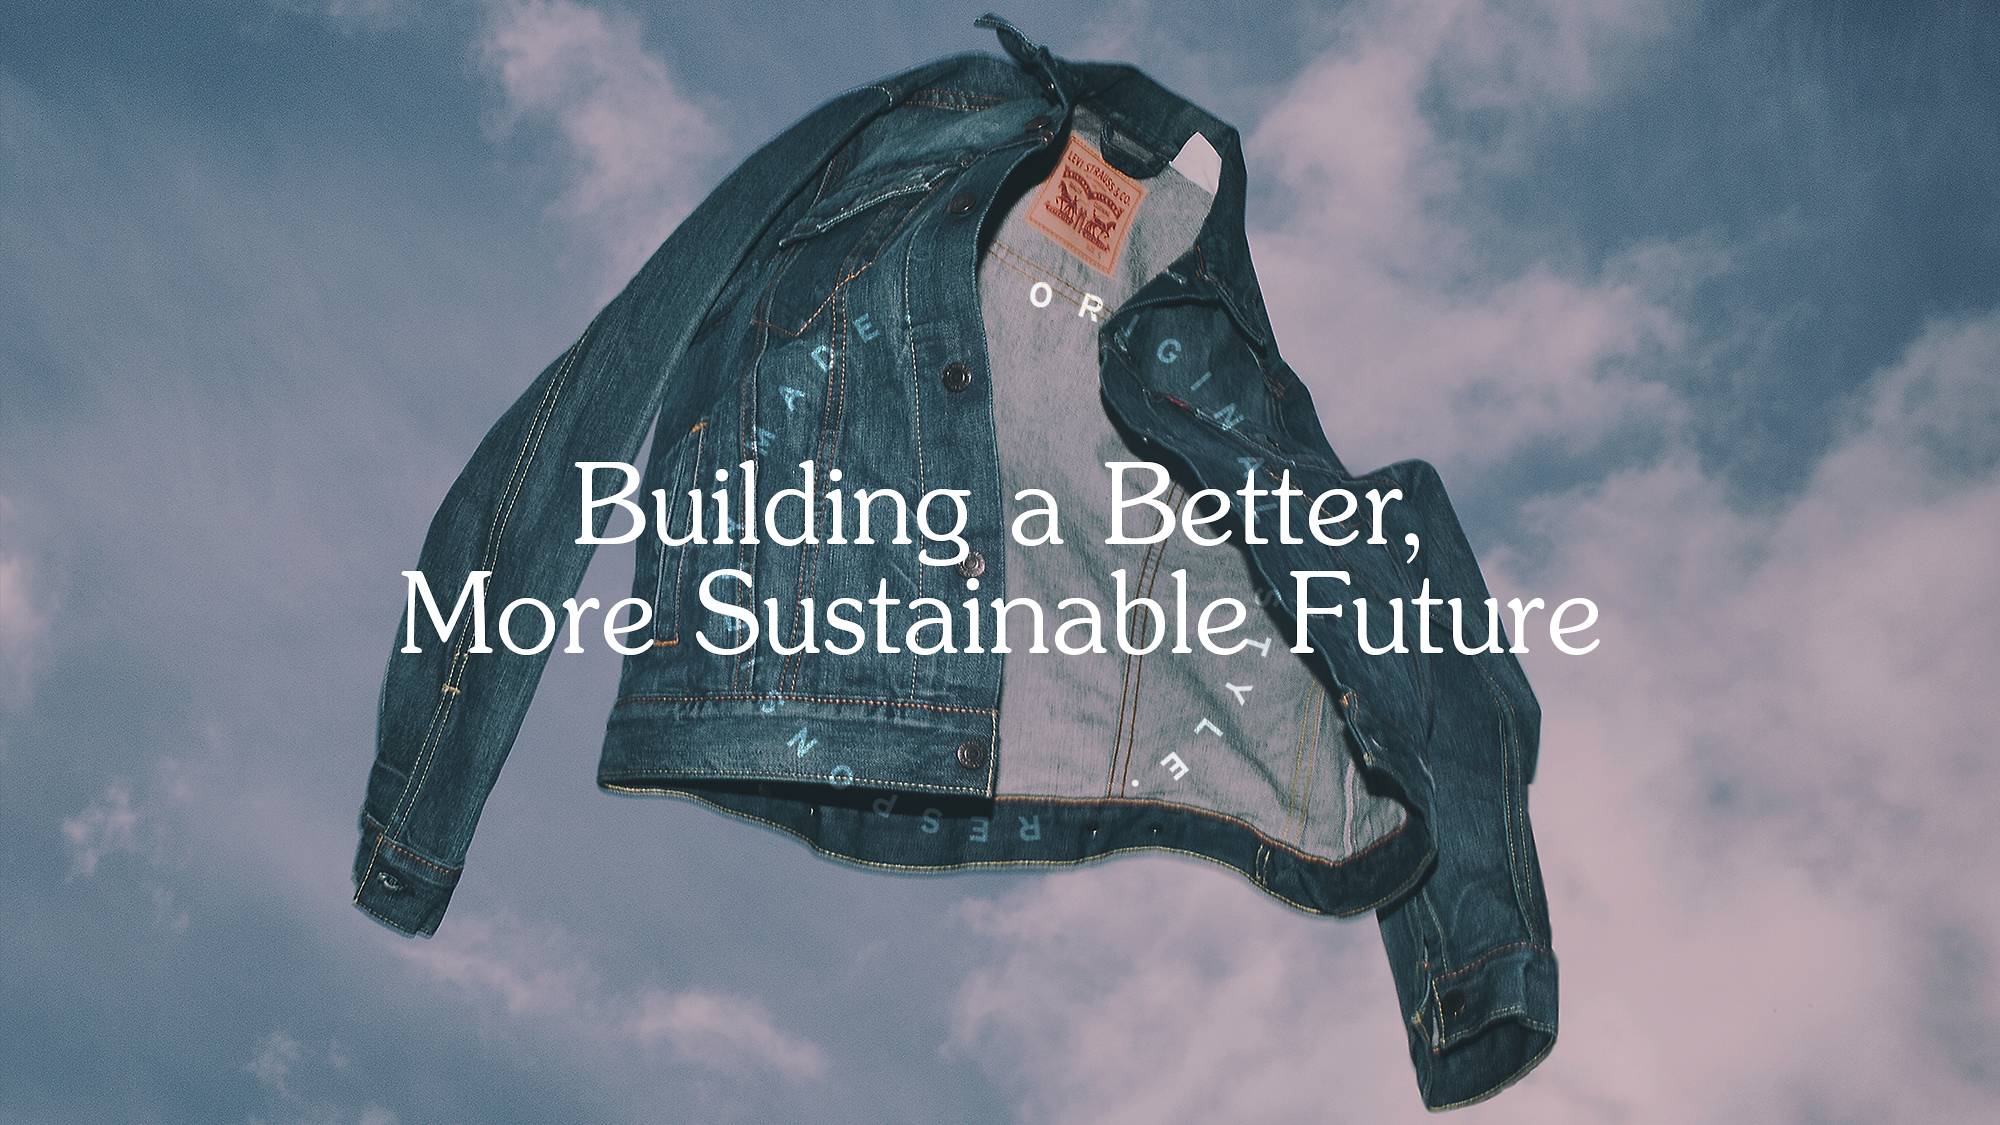 Uitgaan Steken Sui Building a Better, More Sustainable Future